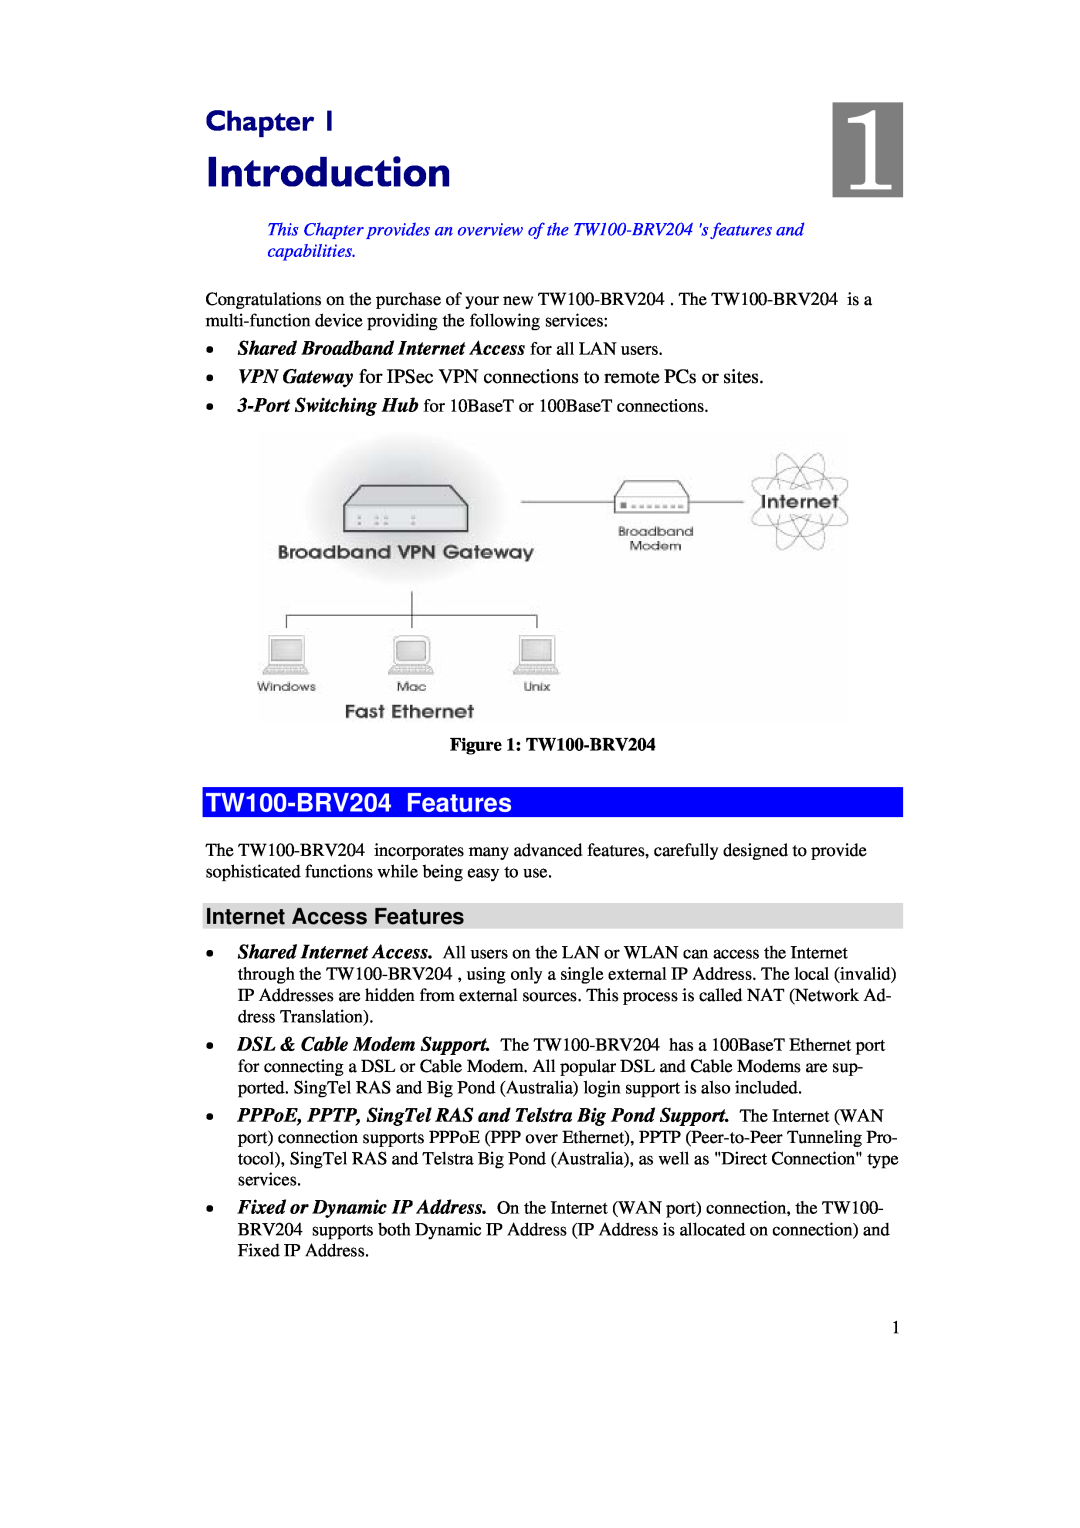 TRENDnet manual Introduction, Chapter, TW100-BRV204 Features, Internet Access Features 